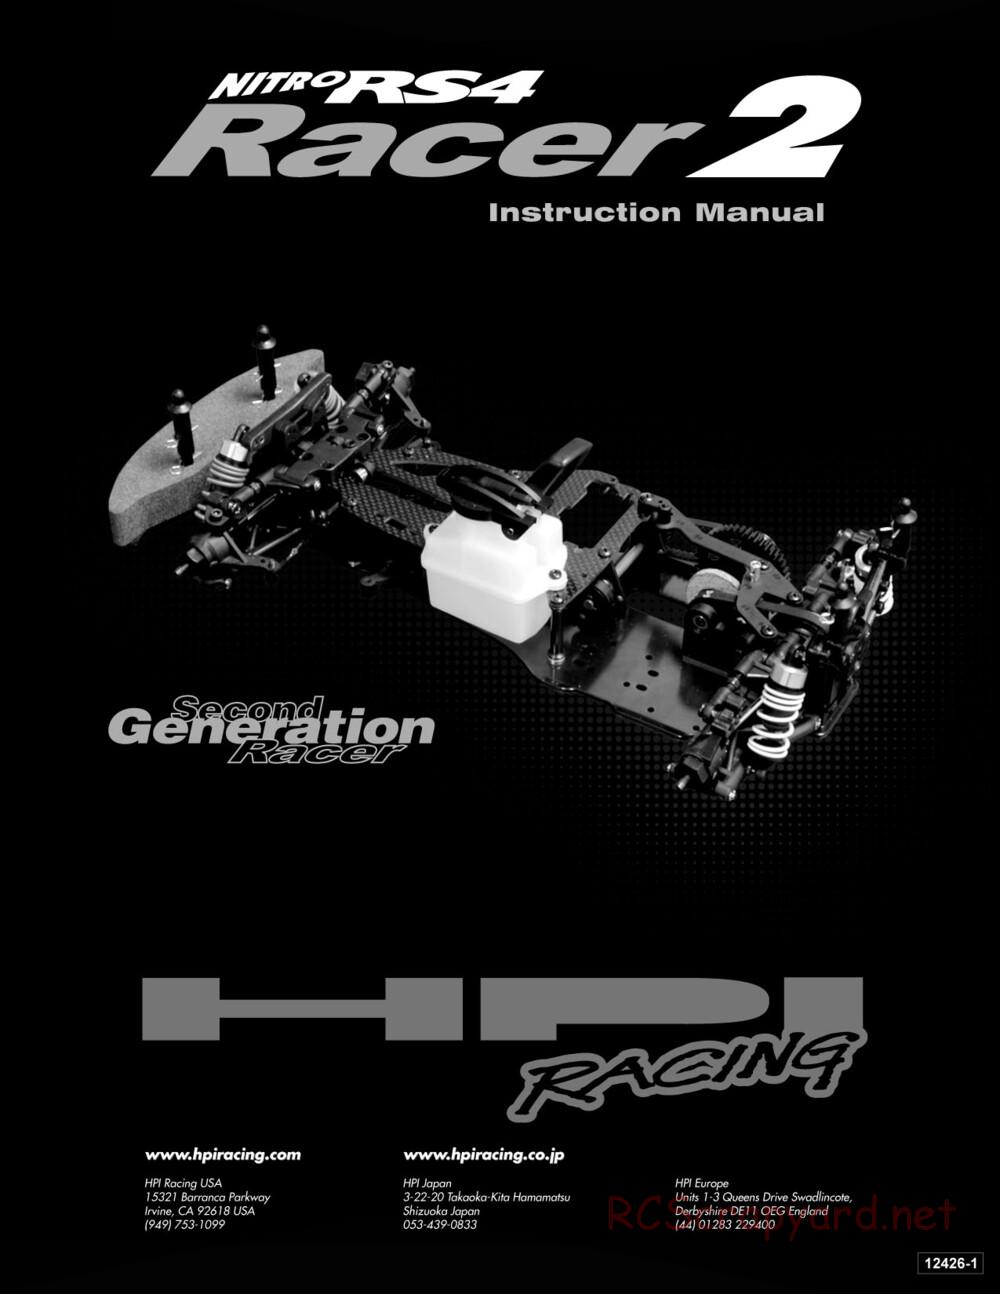 HPI - Nitro RS4 Racer 2 Chassis - Manual - Page 1